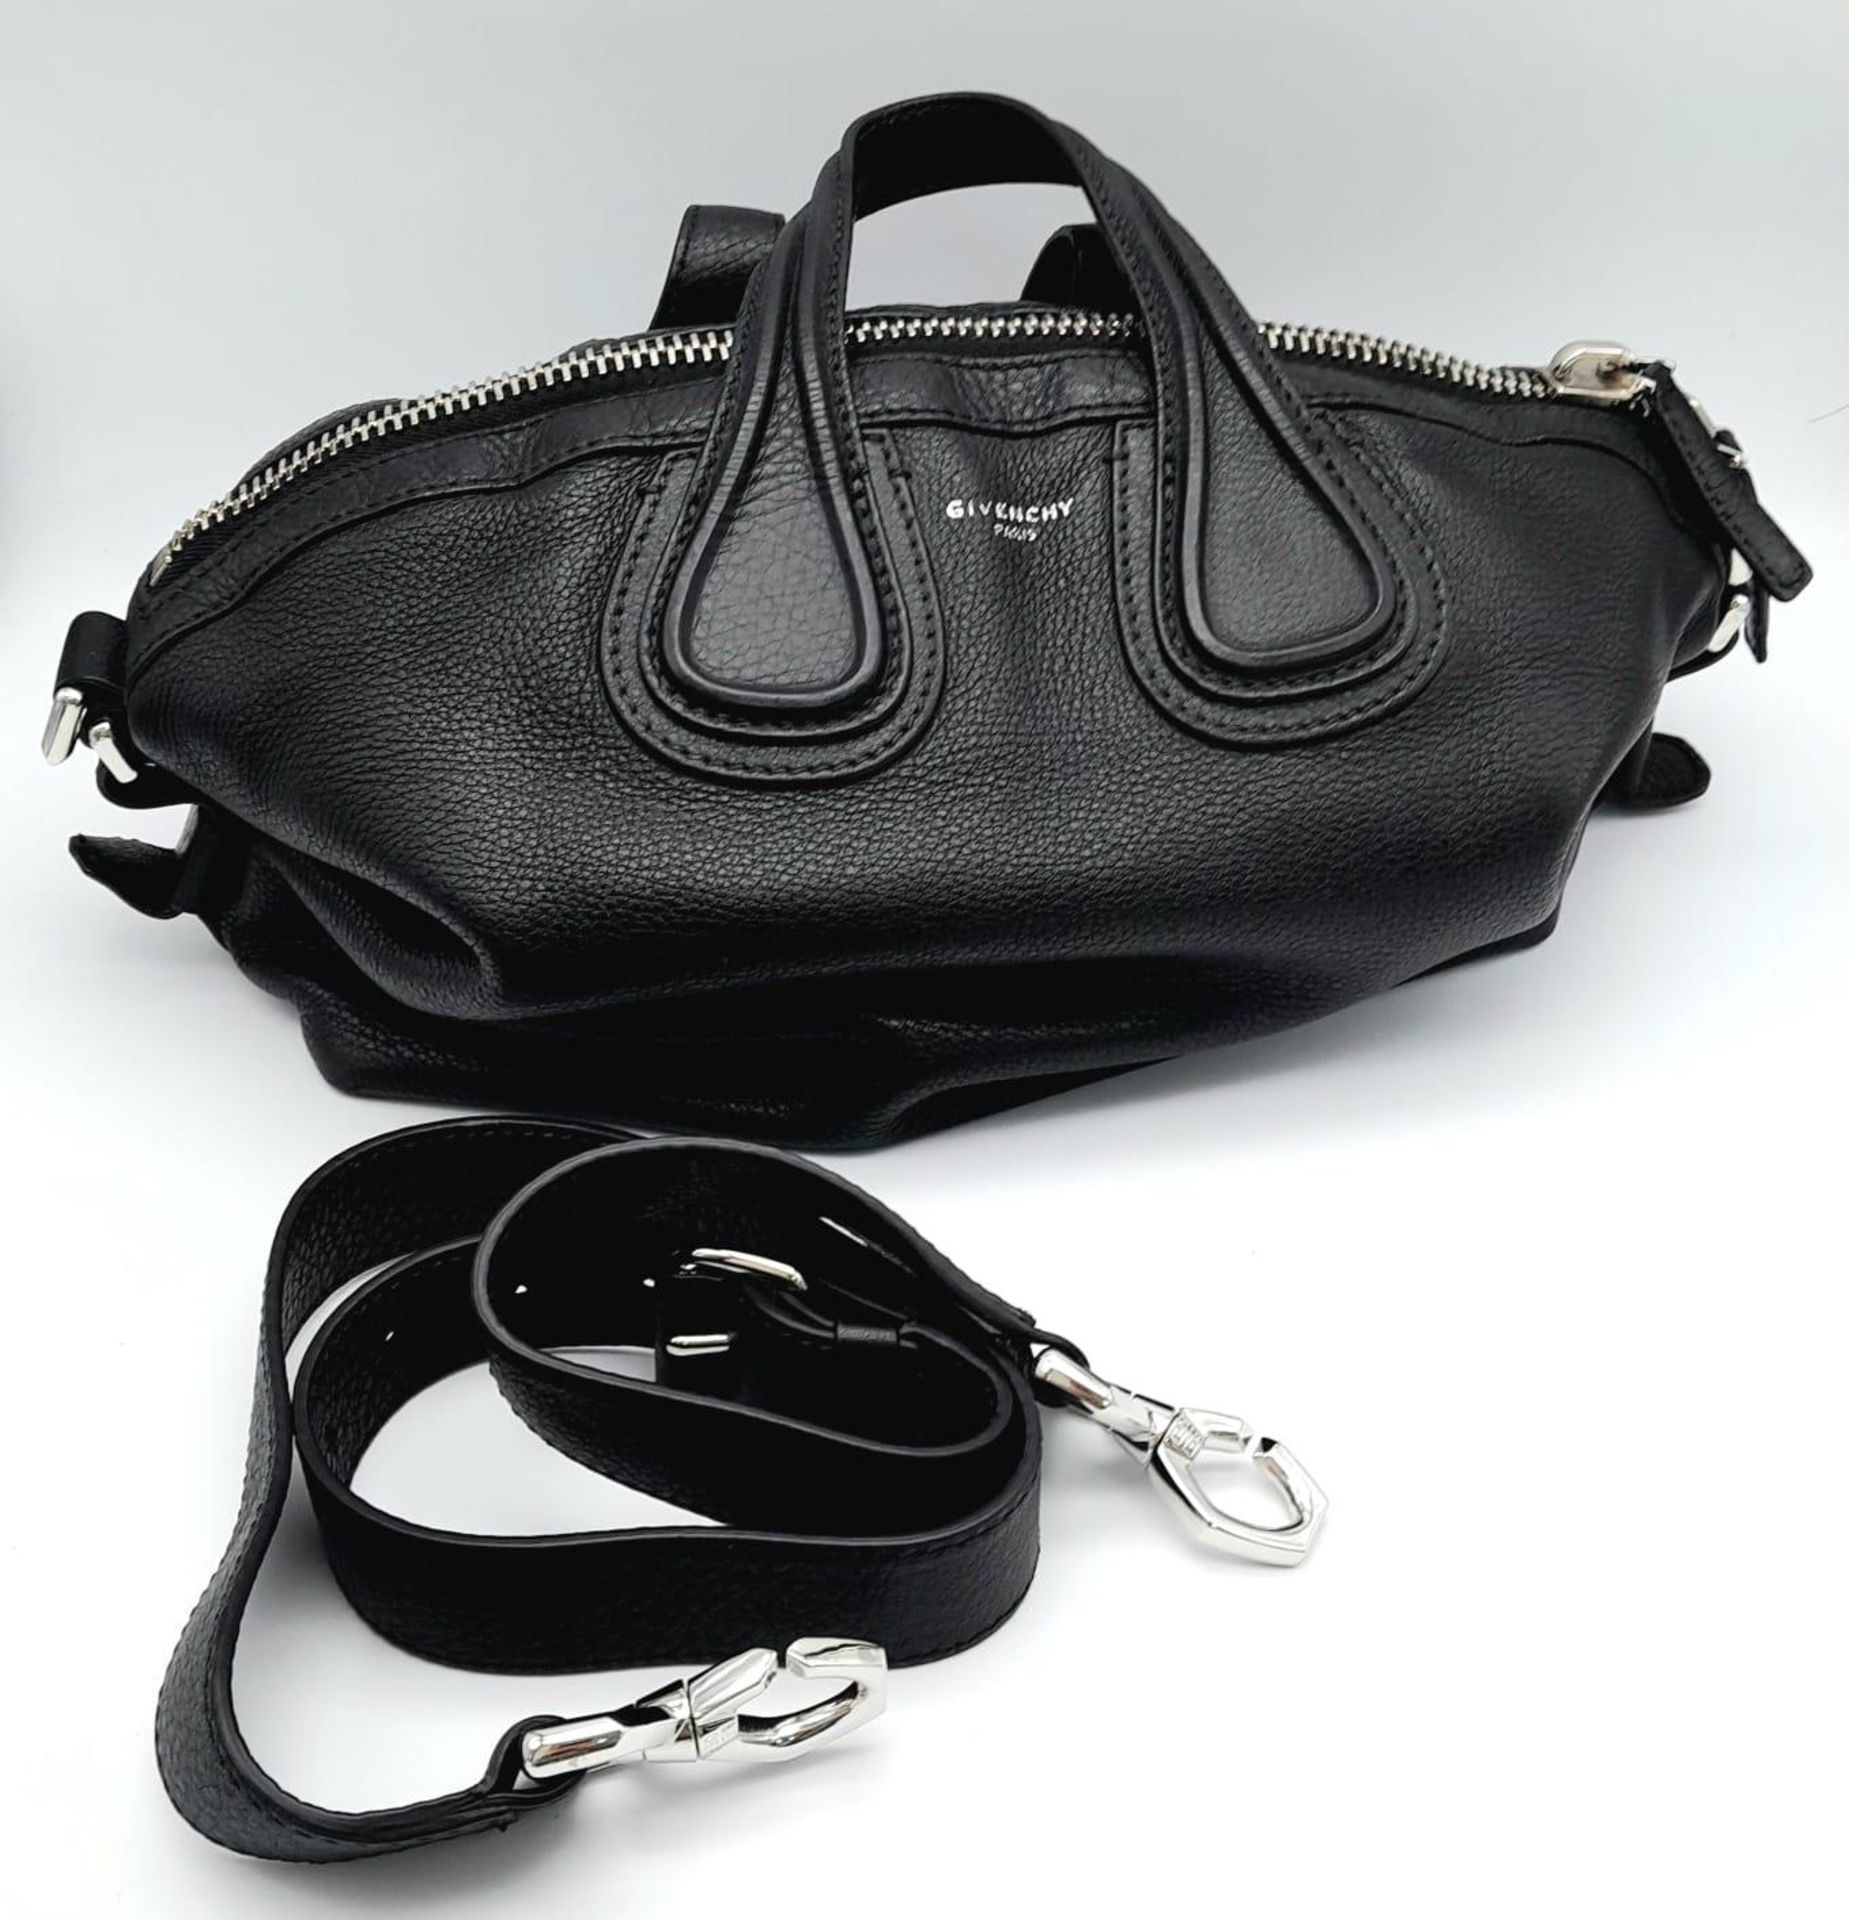 A Givenchy Black Grained Leather Nightingale Shoulder Bag. Come with a detachable shoulder strap. - Image 17 of 17